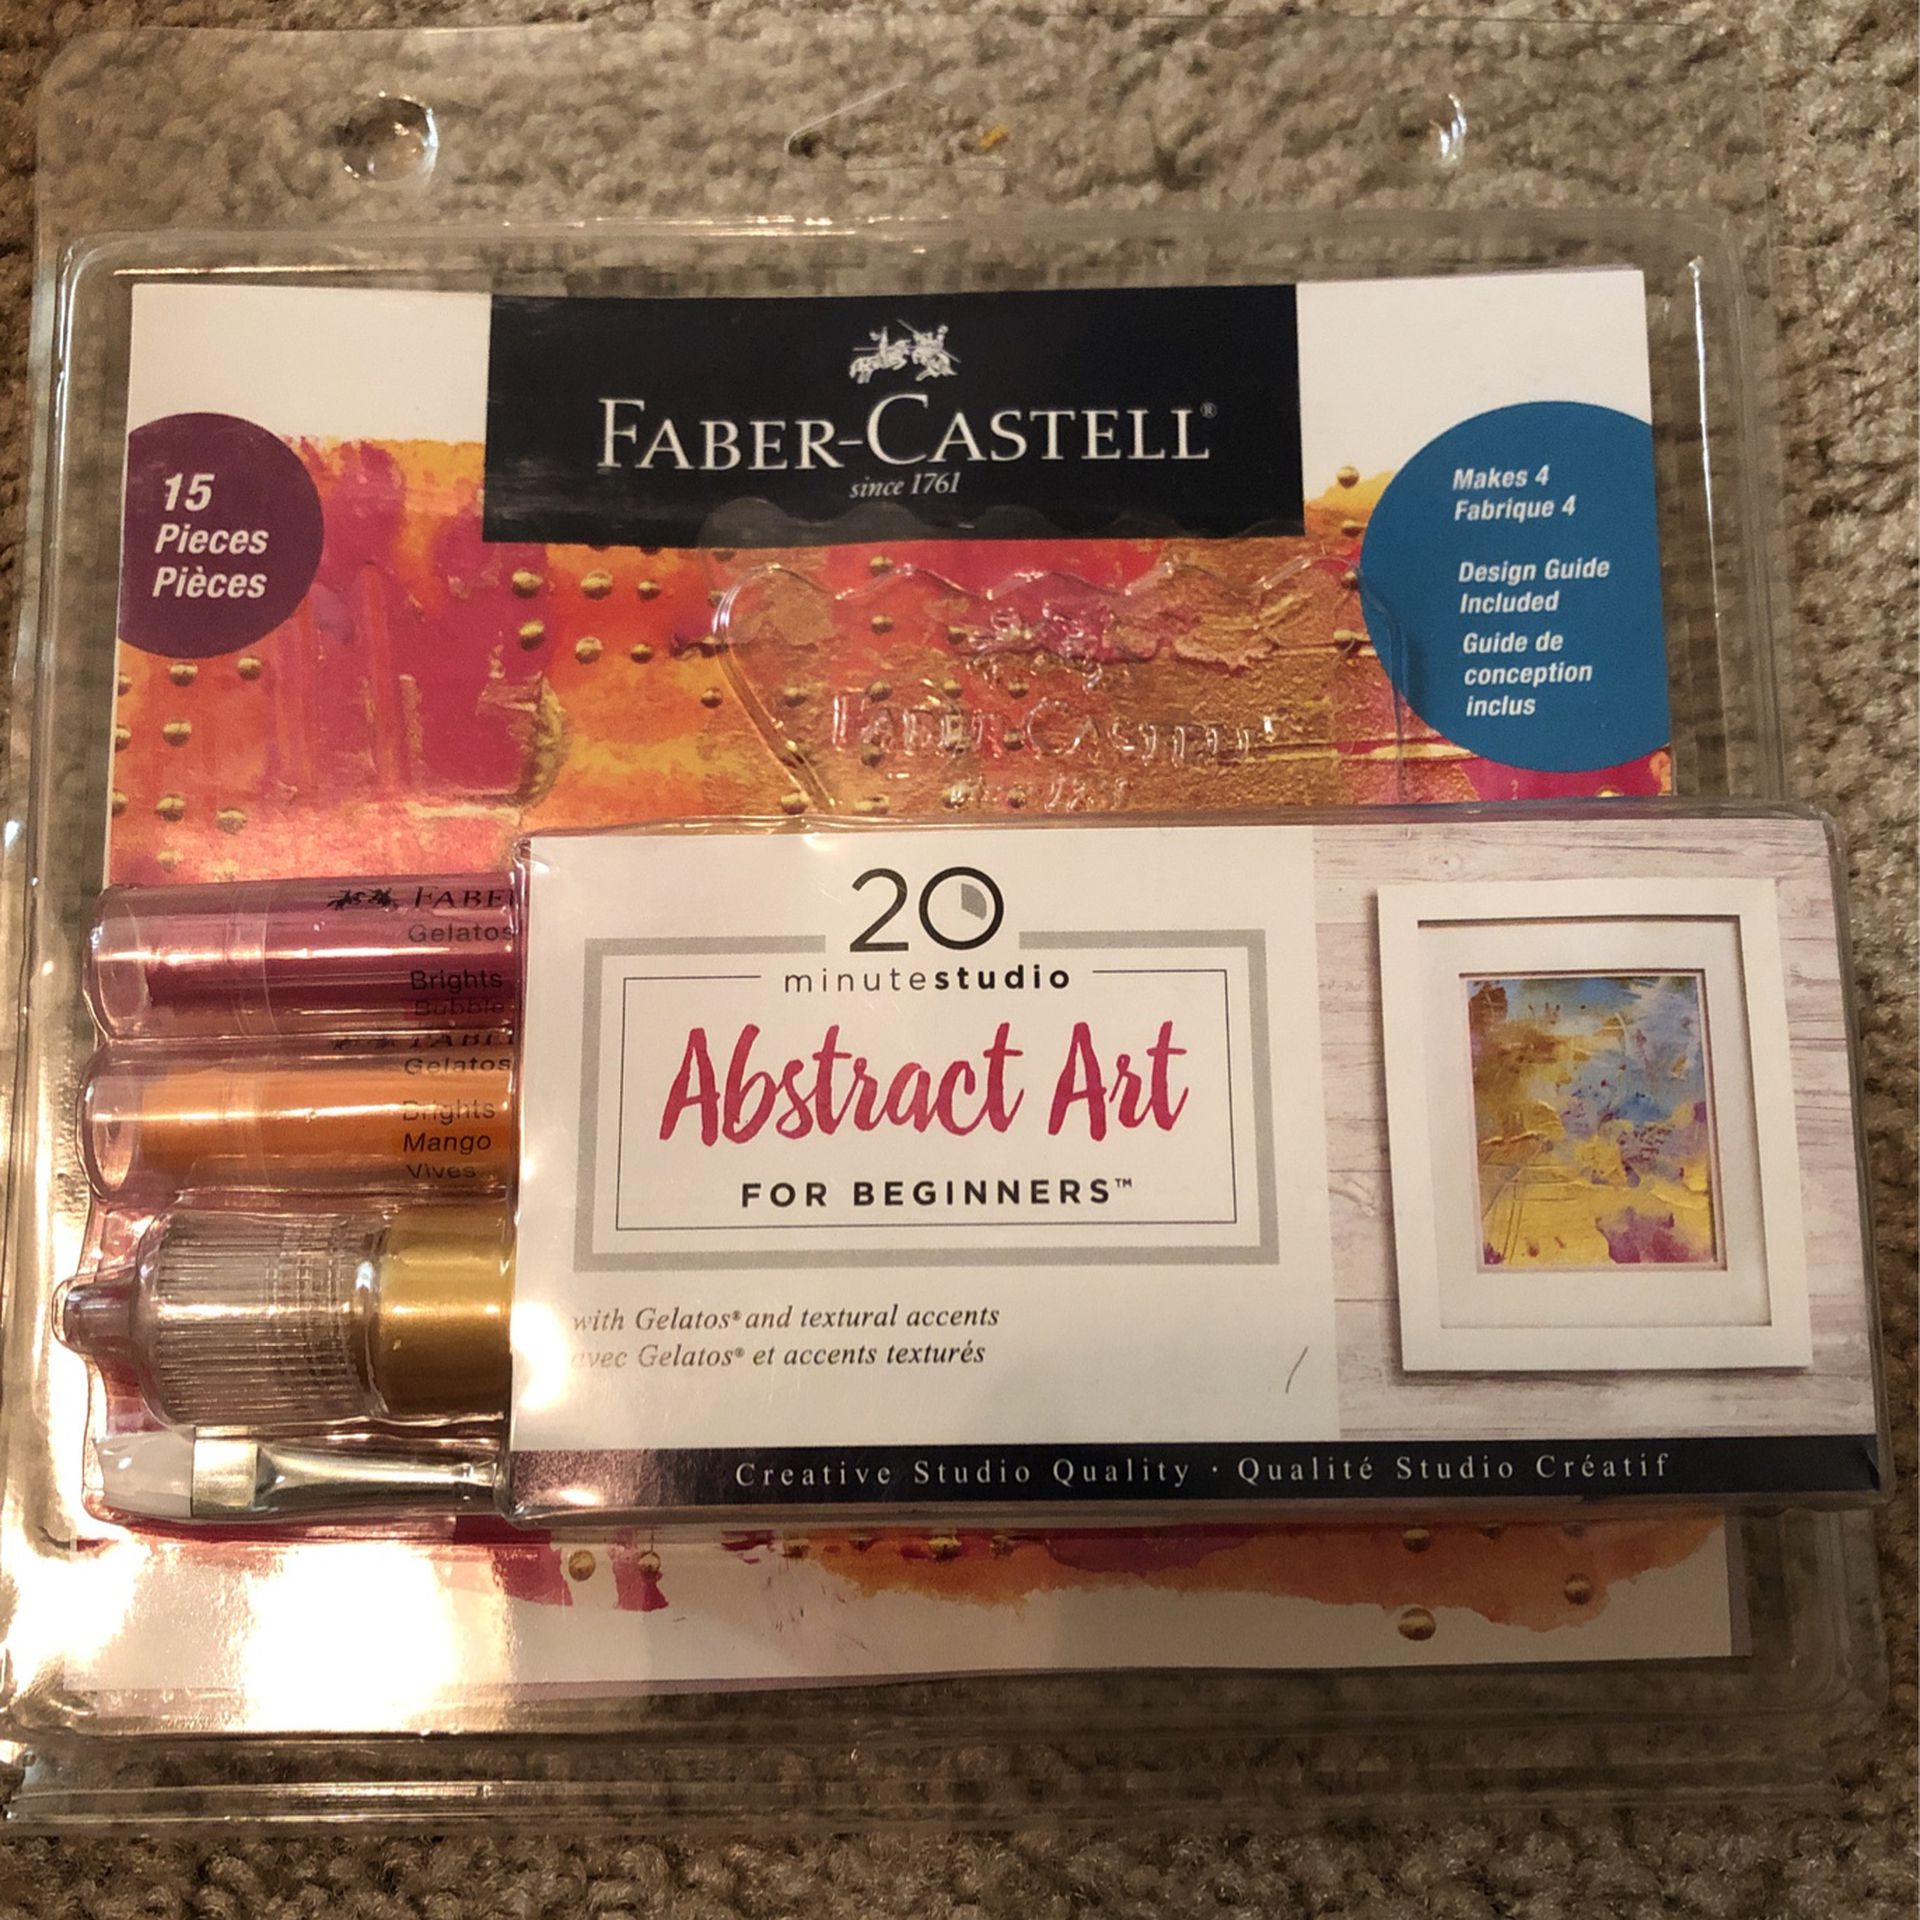 Faber- Castell Abstract Art for Beginners